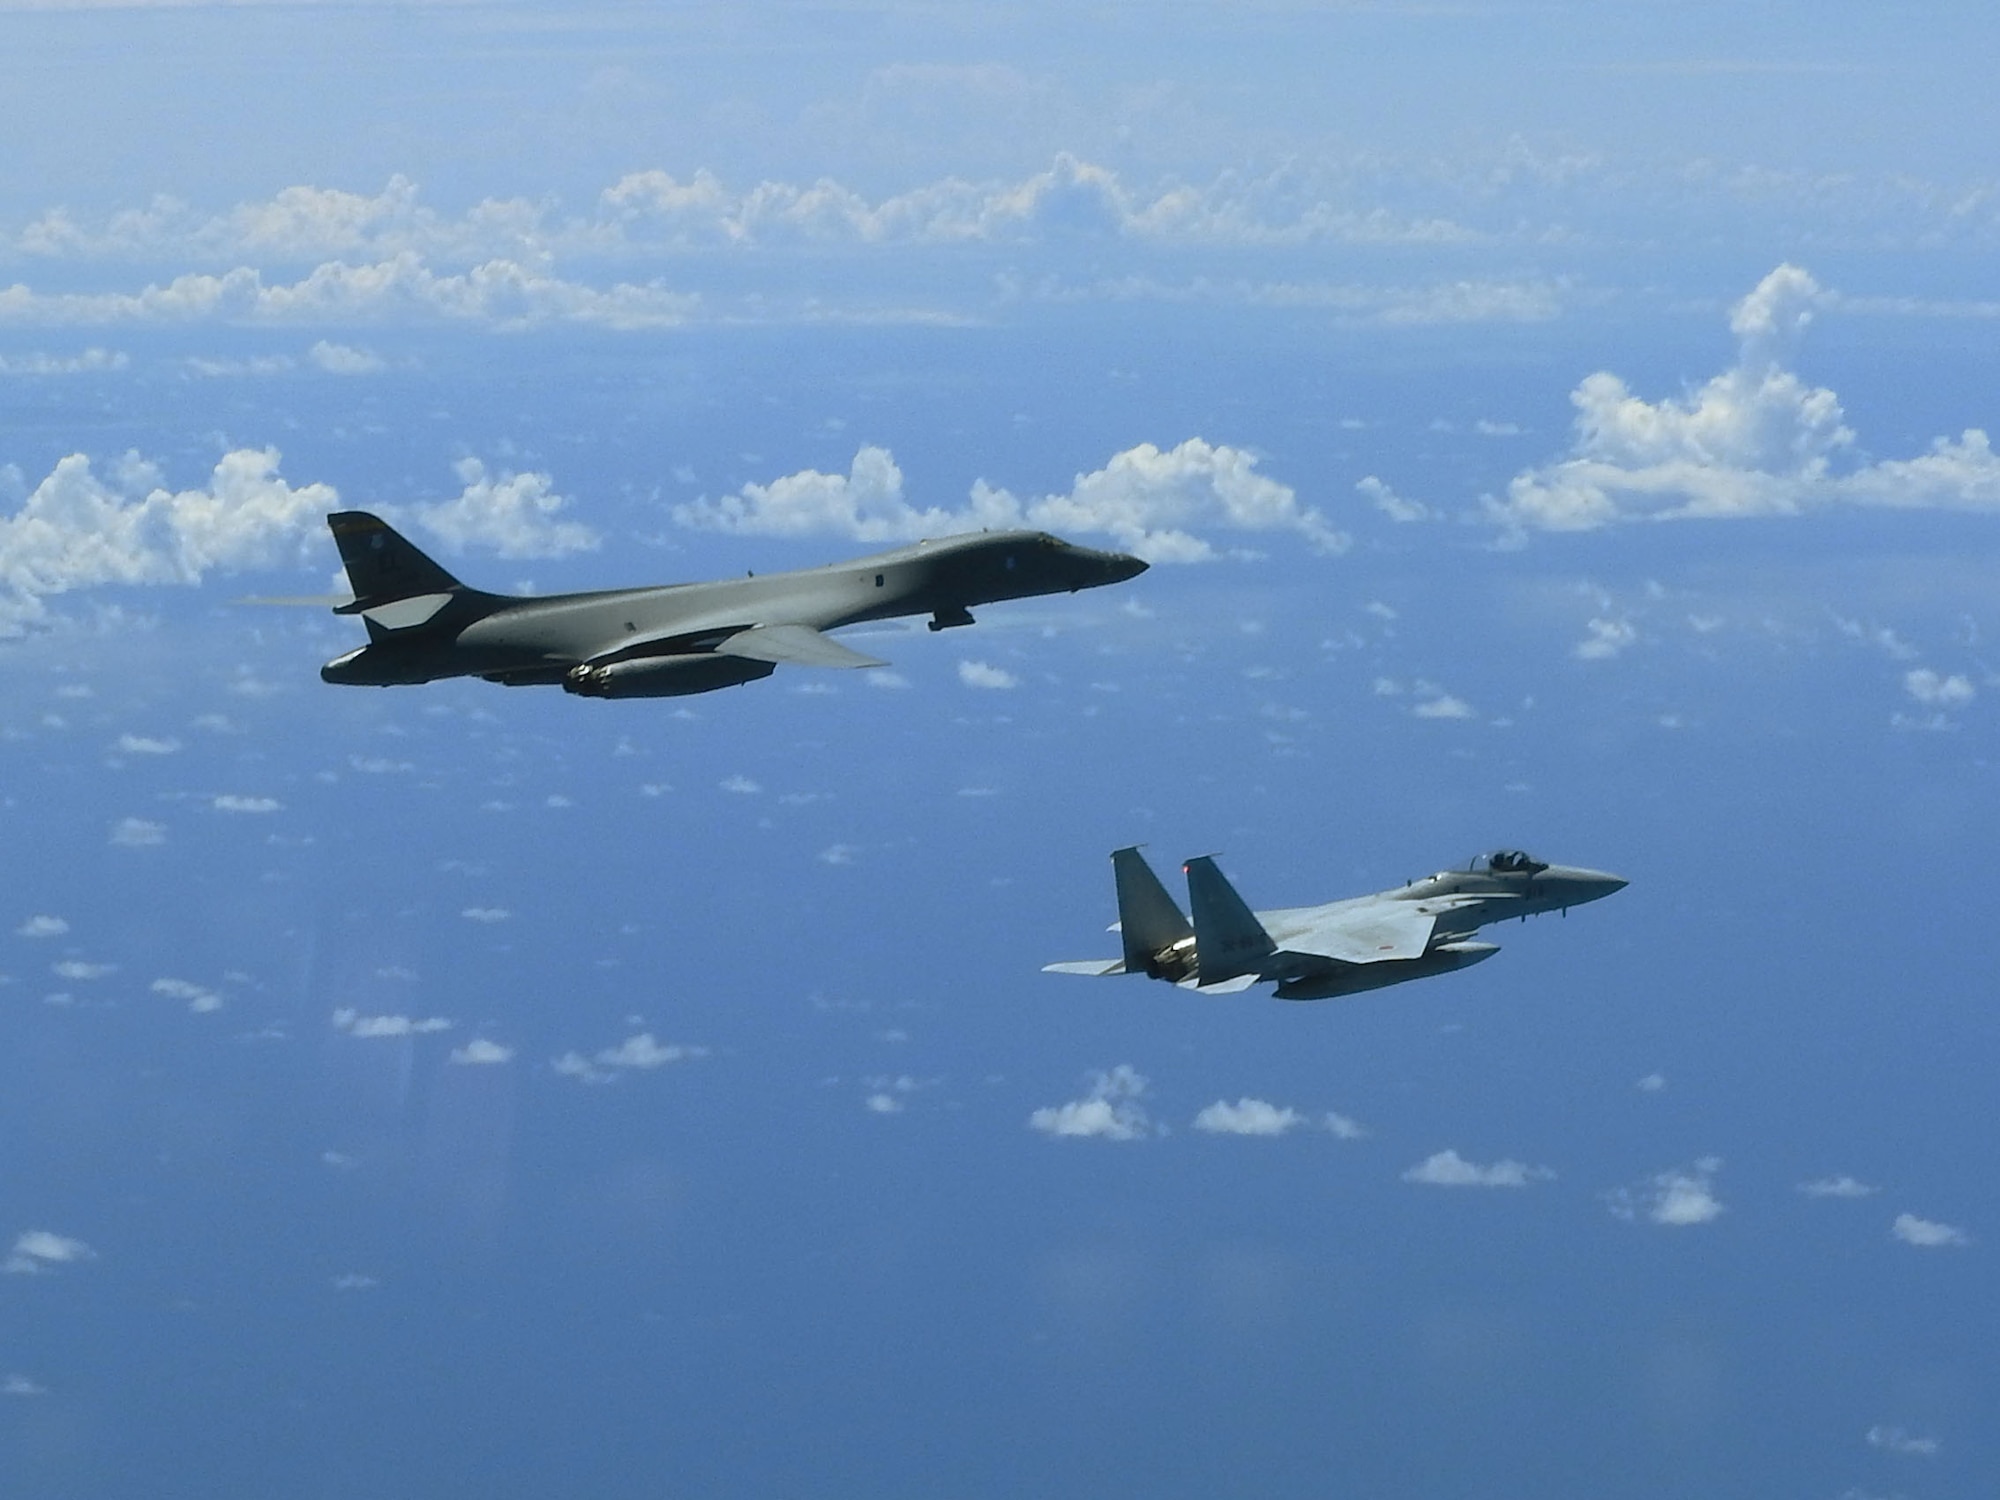 A B-1B Lancer conducts integration training with the Koku-Jieitai, or Japanese Air Self-Defense Force (JASDF) in the vicinity of Japan, Aug. 7, 2020. The B-1s integrated with Koku-Jietai to enhance bilateral interoperability and mutual readiness between the U.S. and Japan. (Photo Courtesy of JASDF)